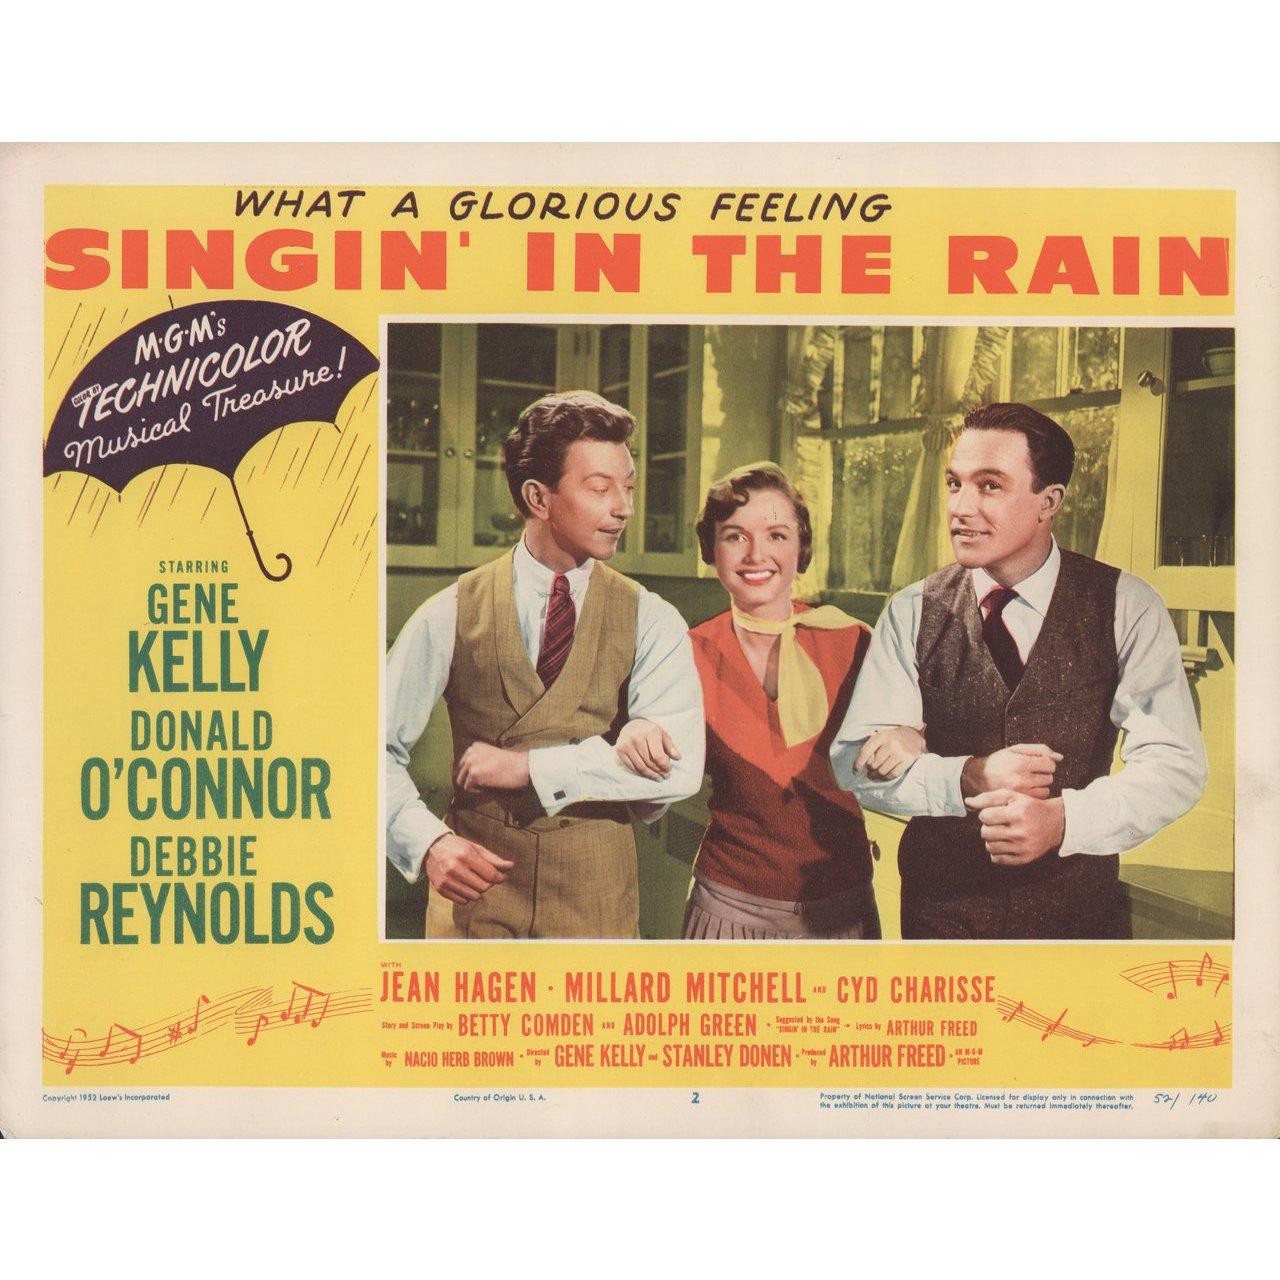 Original 1952 U.S. scene card for the film Singin' in the Rain directed by Stanley Donen / Gene Kelly with Gene Kelly / Donald O'Connor / Debbie Reynolds / Jean Hagen. Fine condition. Please note: the size is stated in inches and the actual size can